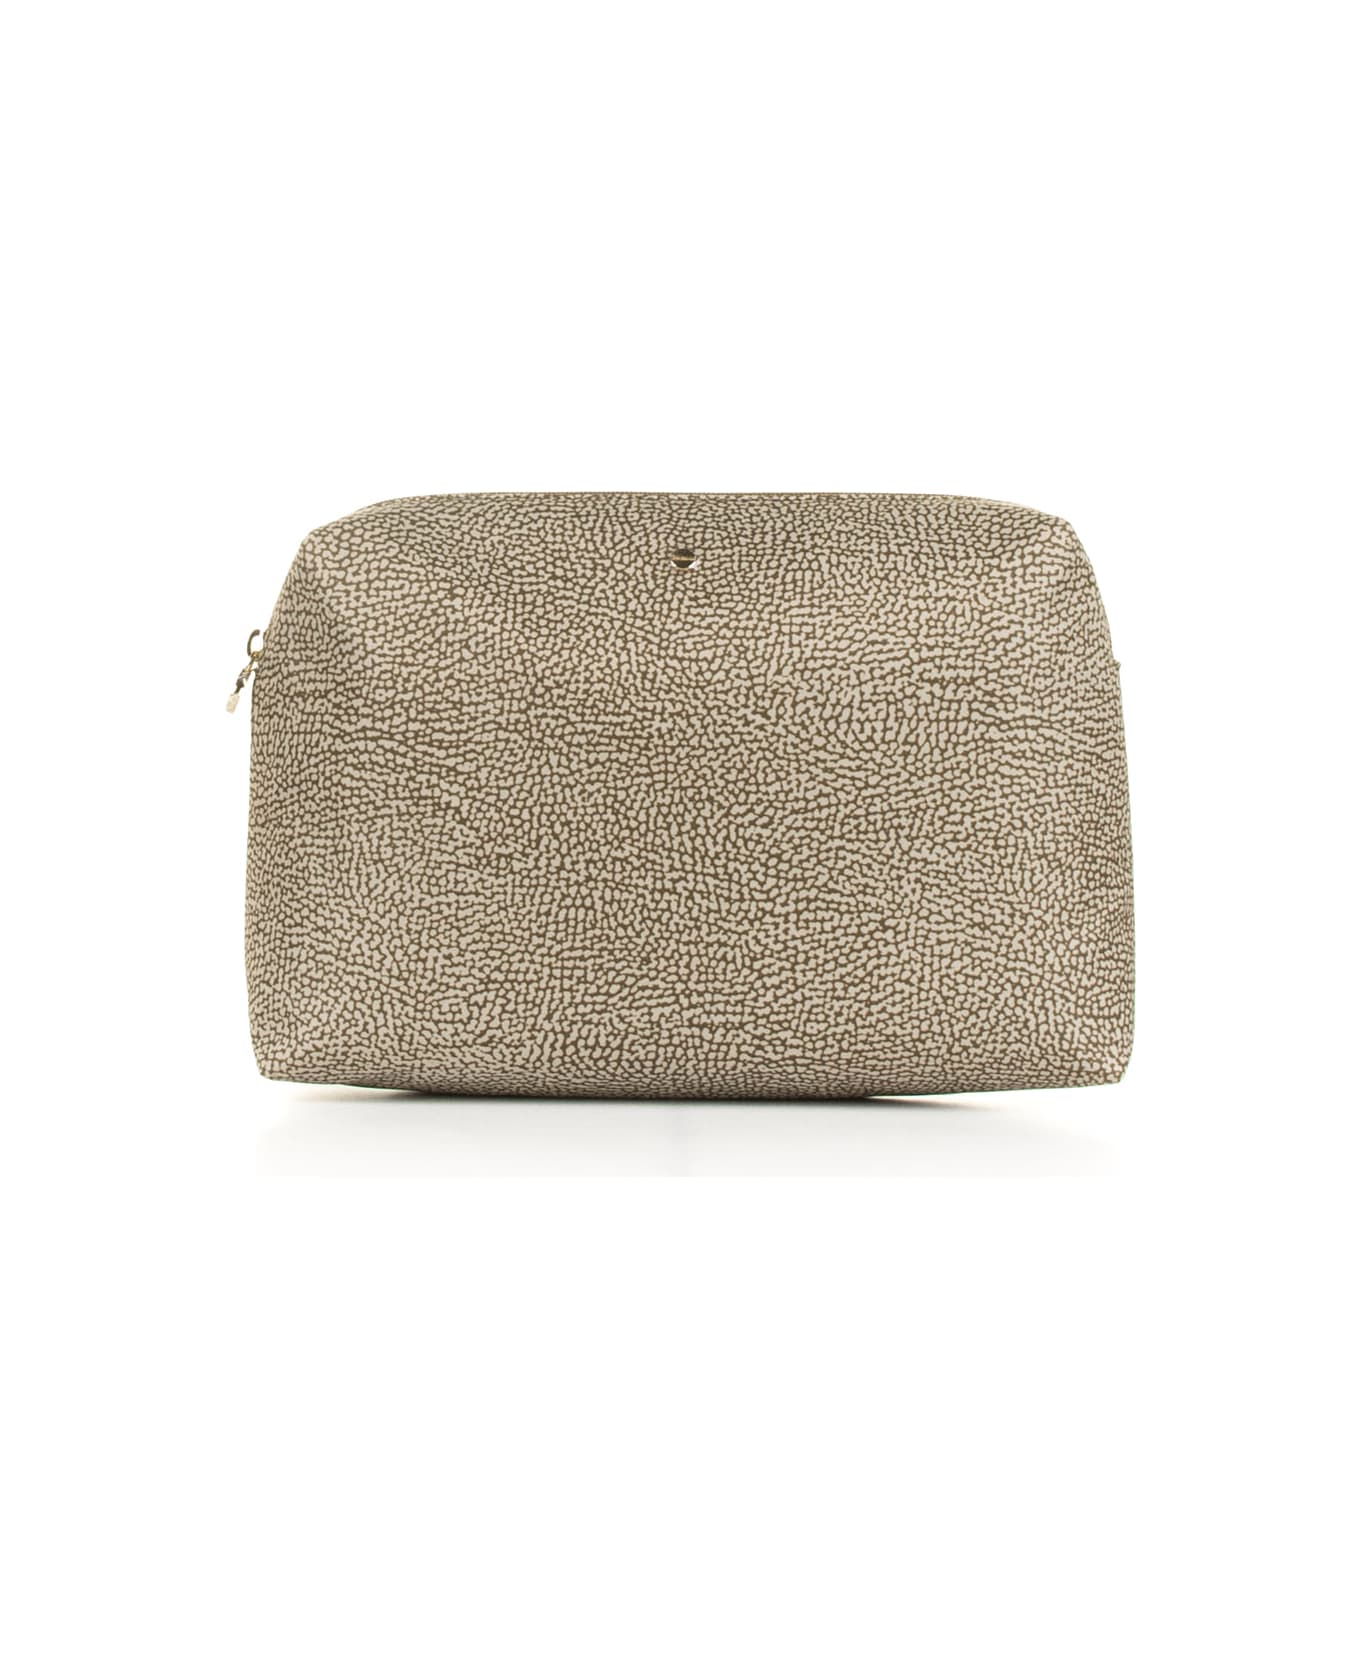 Borbonese Medium Clutch Bag In Op Fabric And Leather - BEIGE/MARRONE クラッチバッグ